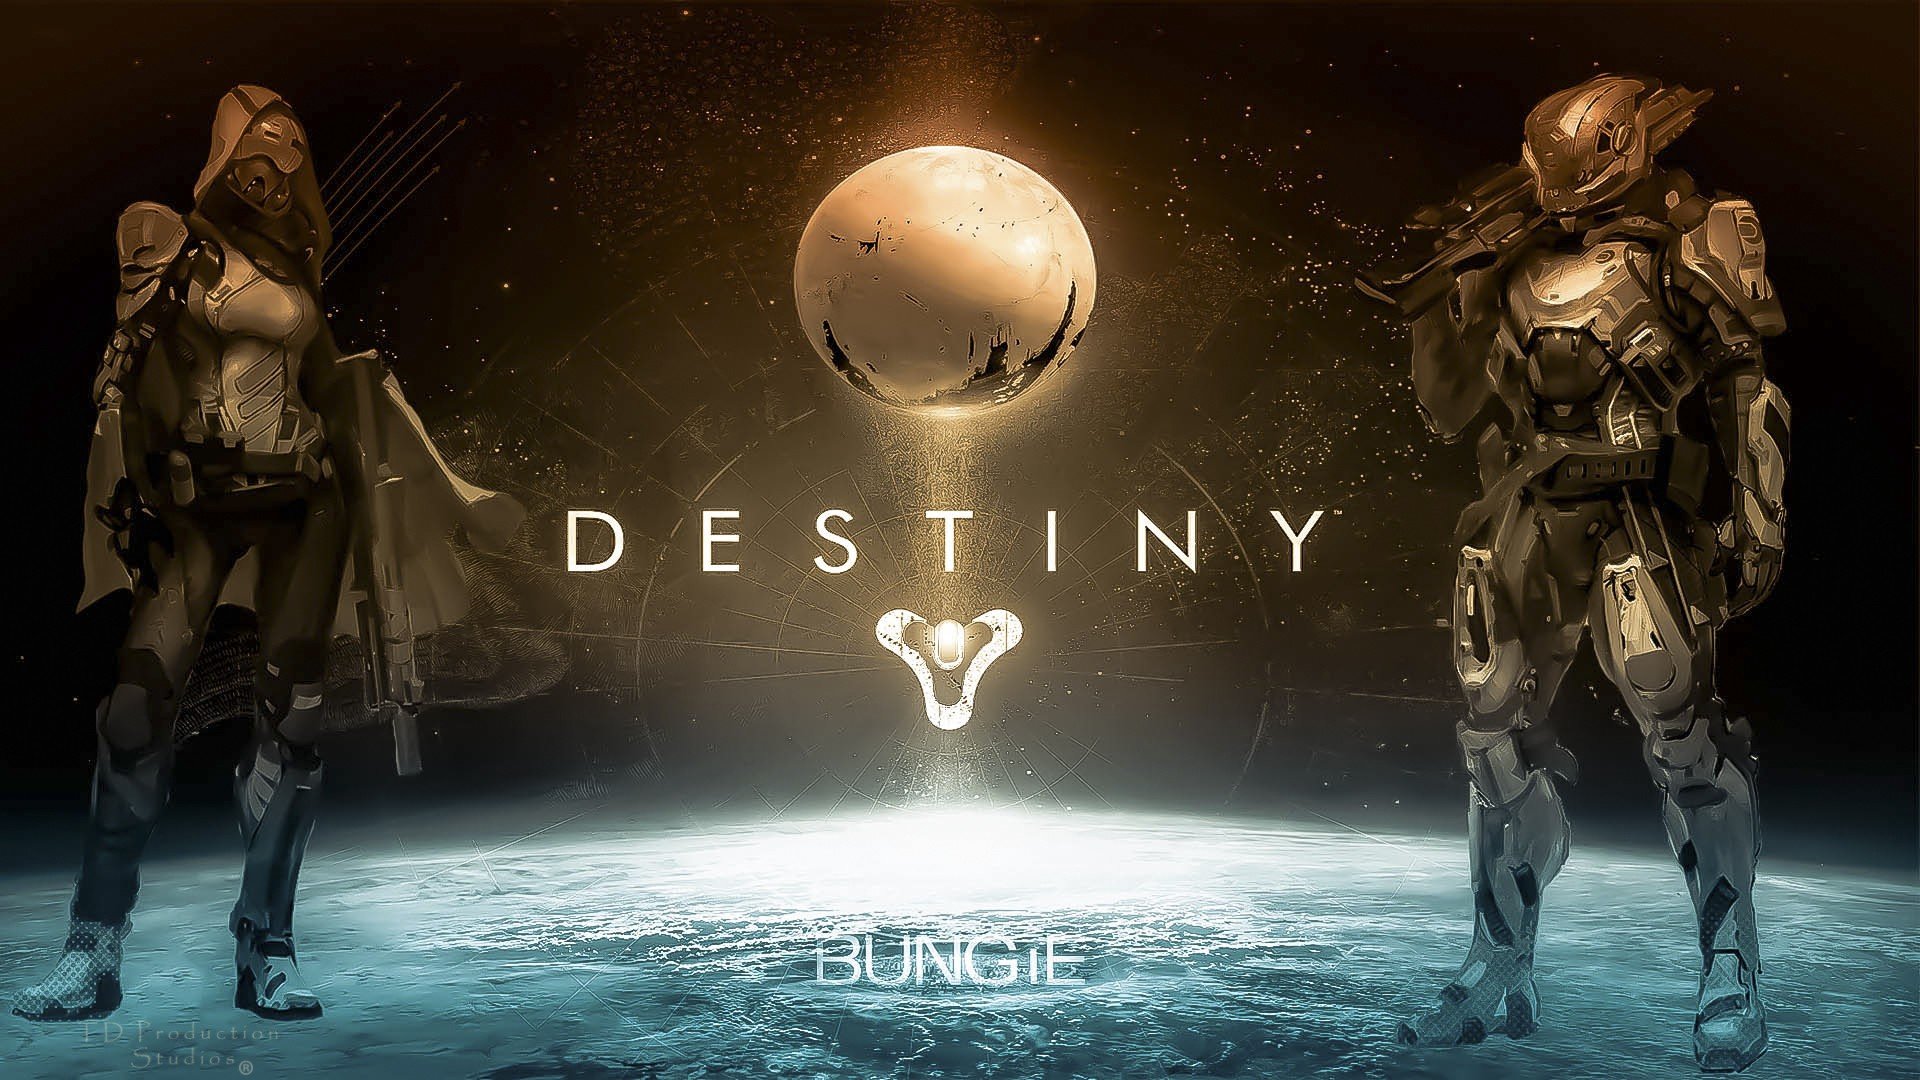 Destiny (video game), Bungie Wallpapers HD / Desktop and ...